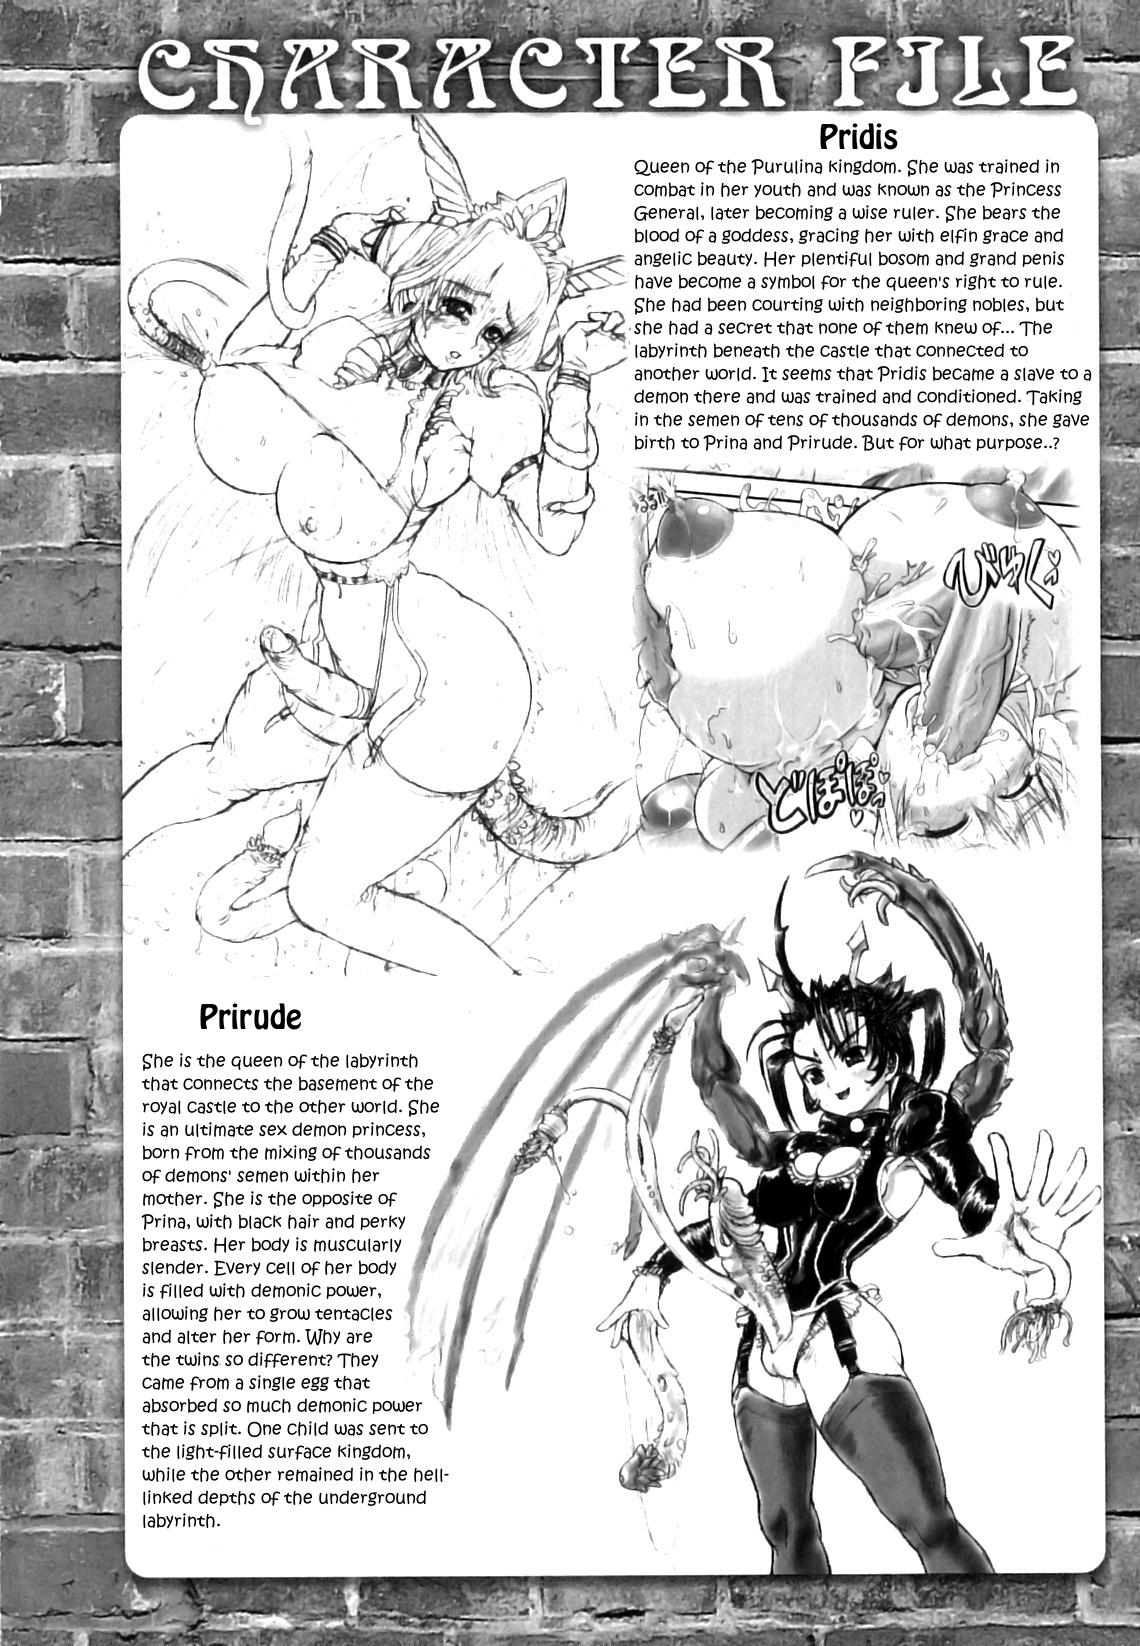 Bra Sex With a Snake Demon + Character Profiles Tinder - Page 13